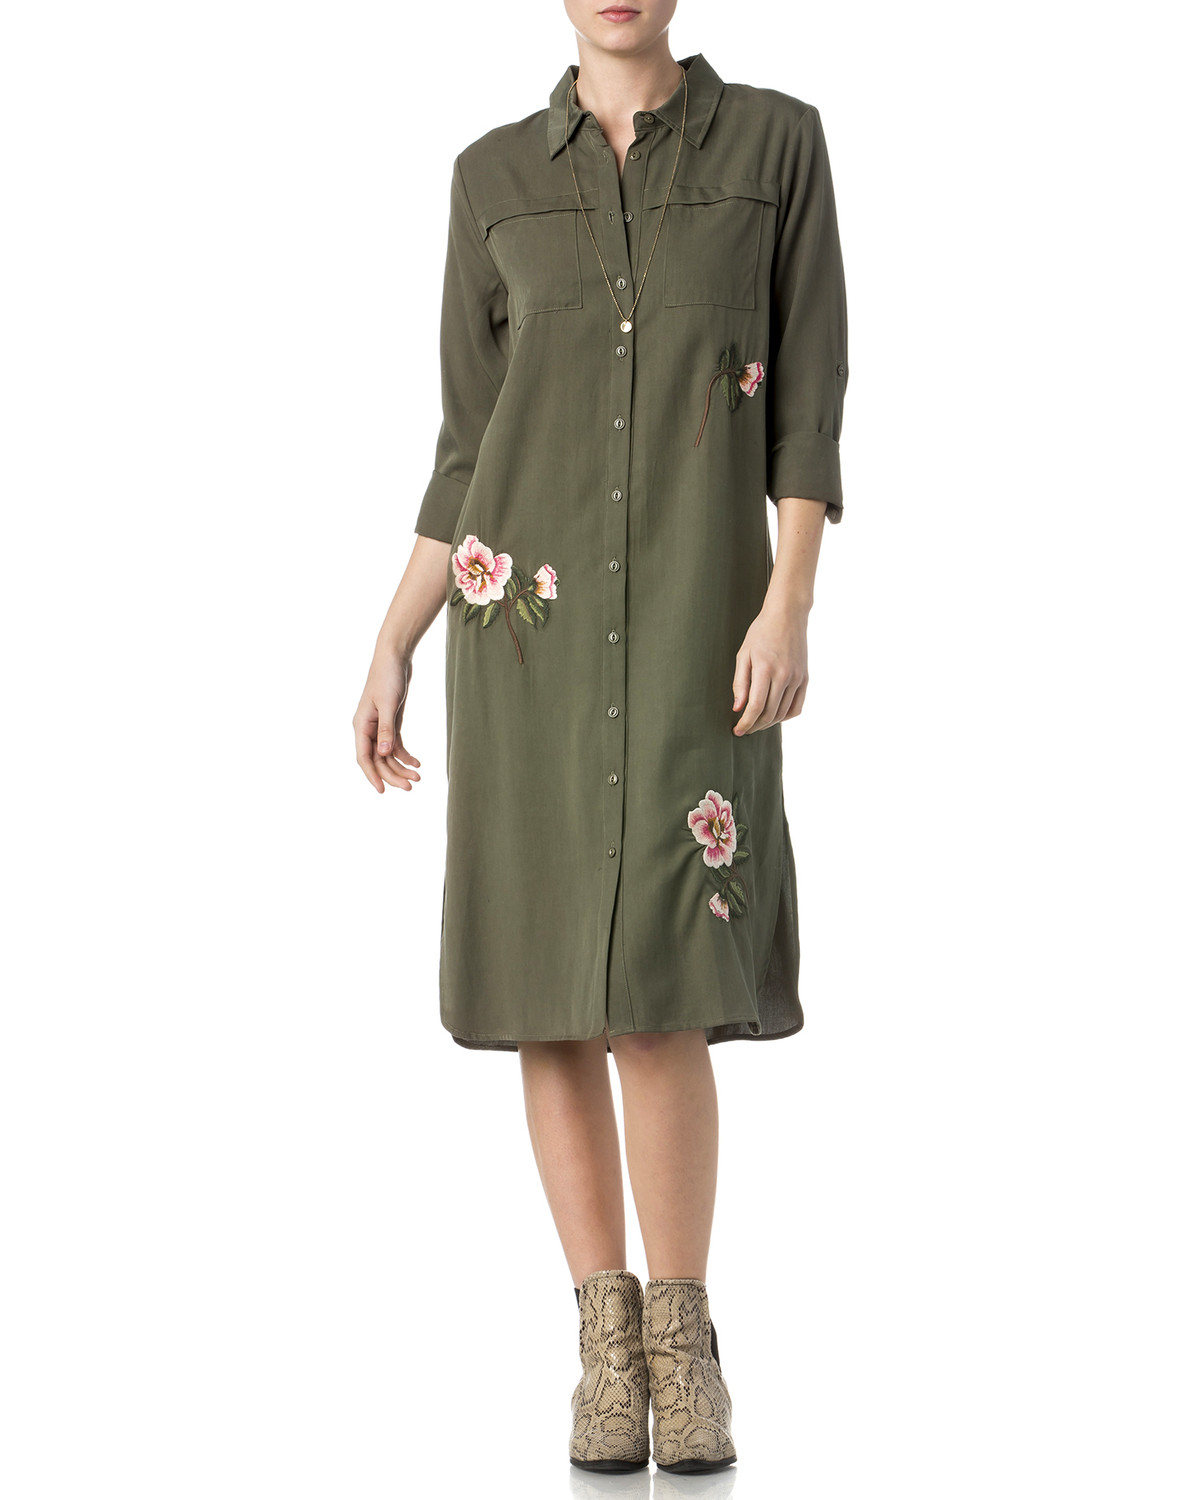 olive button down dress